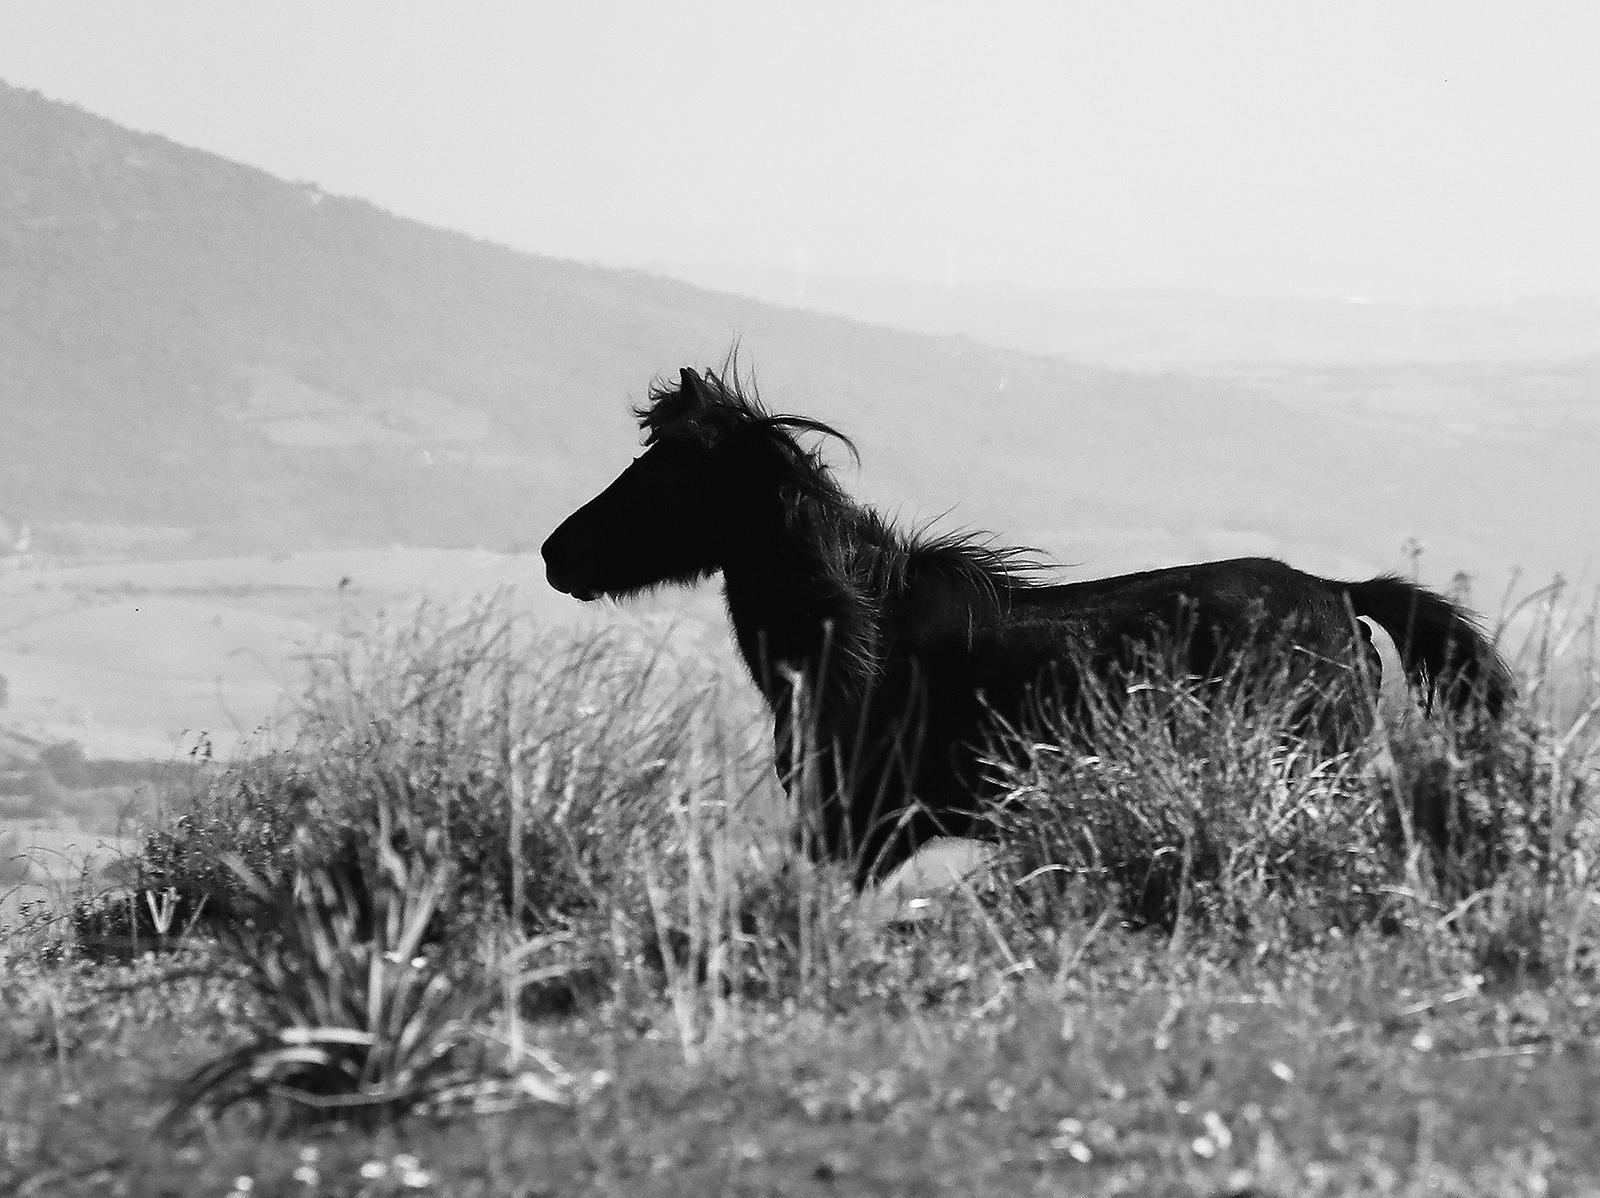  Cavallini 02  - Signed limited edition archival pigment print, 2015    -  Edition : 2 of 5

The last wild horses , Sardegna altiplano della Giara, Italy
Personal book project.

This is an Archival Pigment print on fiber based paper ( Hahnemühle